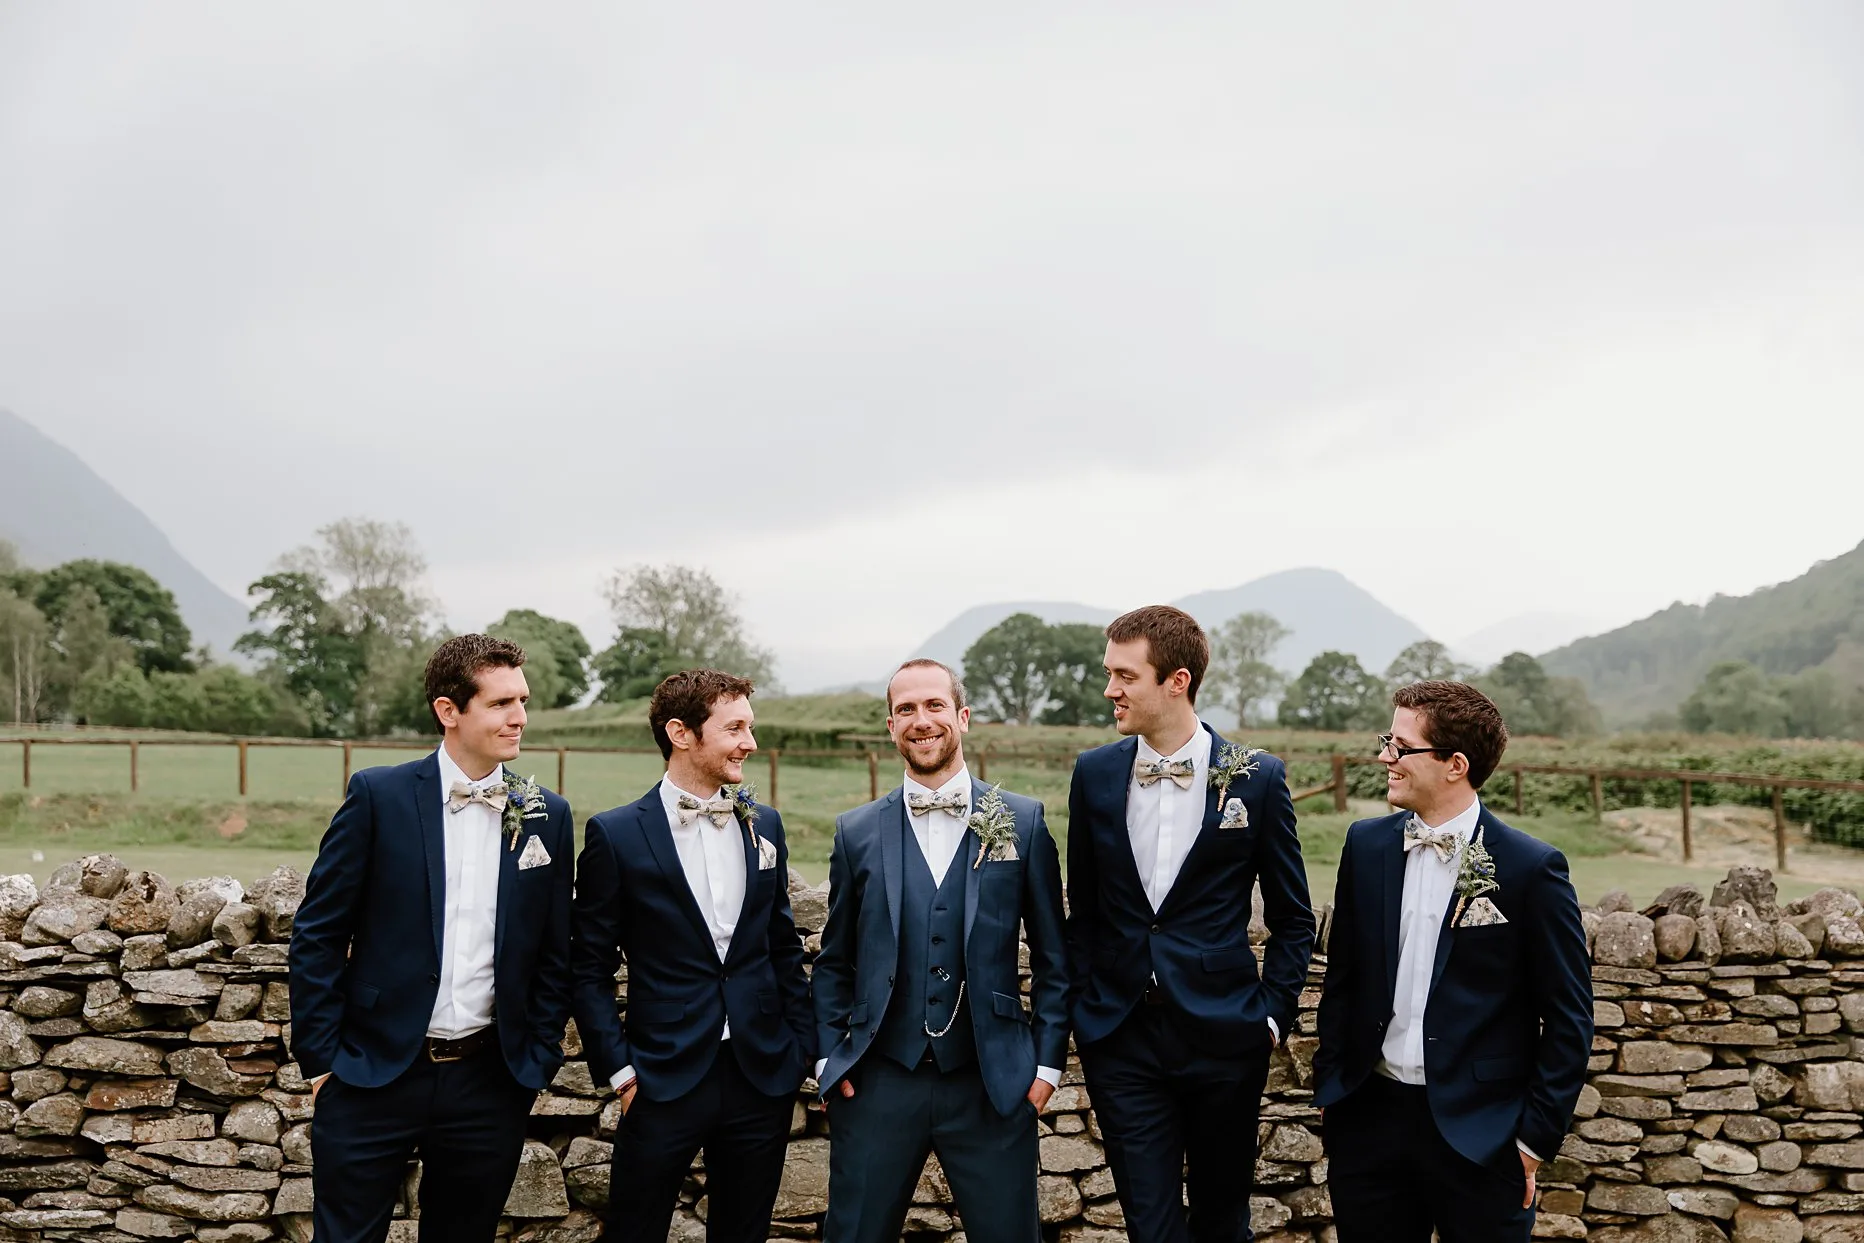 Groom stood with four groomsmen against stone wall in the gardens of New House Farm. All the men are wearing blue suits with a floral bow tie and have their hands in pockets. Groomsmen are looking towards the groom. Beautiful Lake District scenery can be seen in the background.